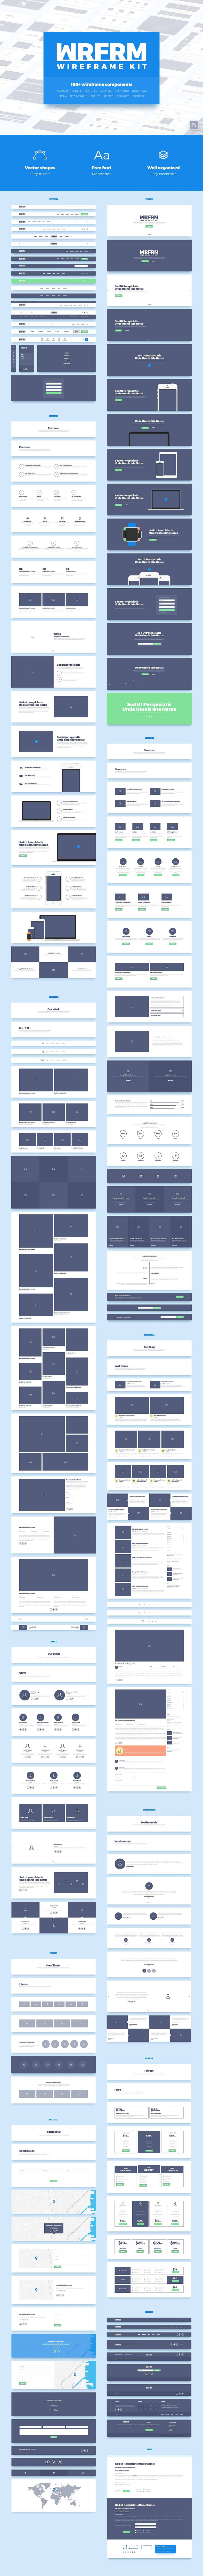 Wireframe Kit for Photoshop